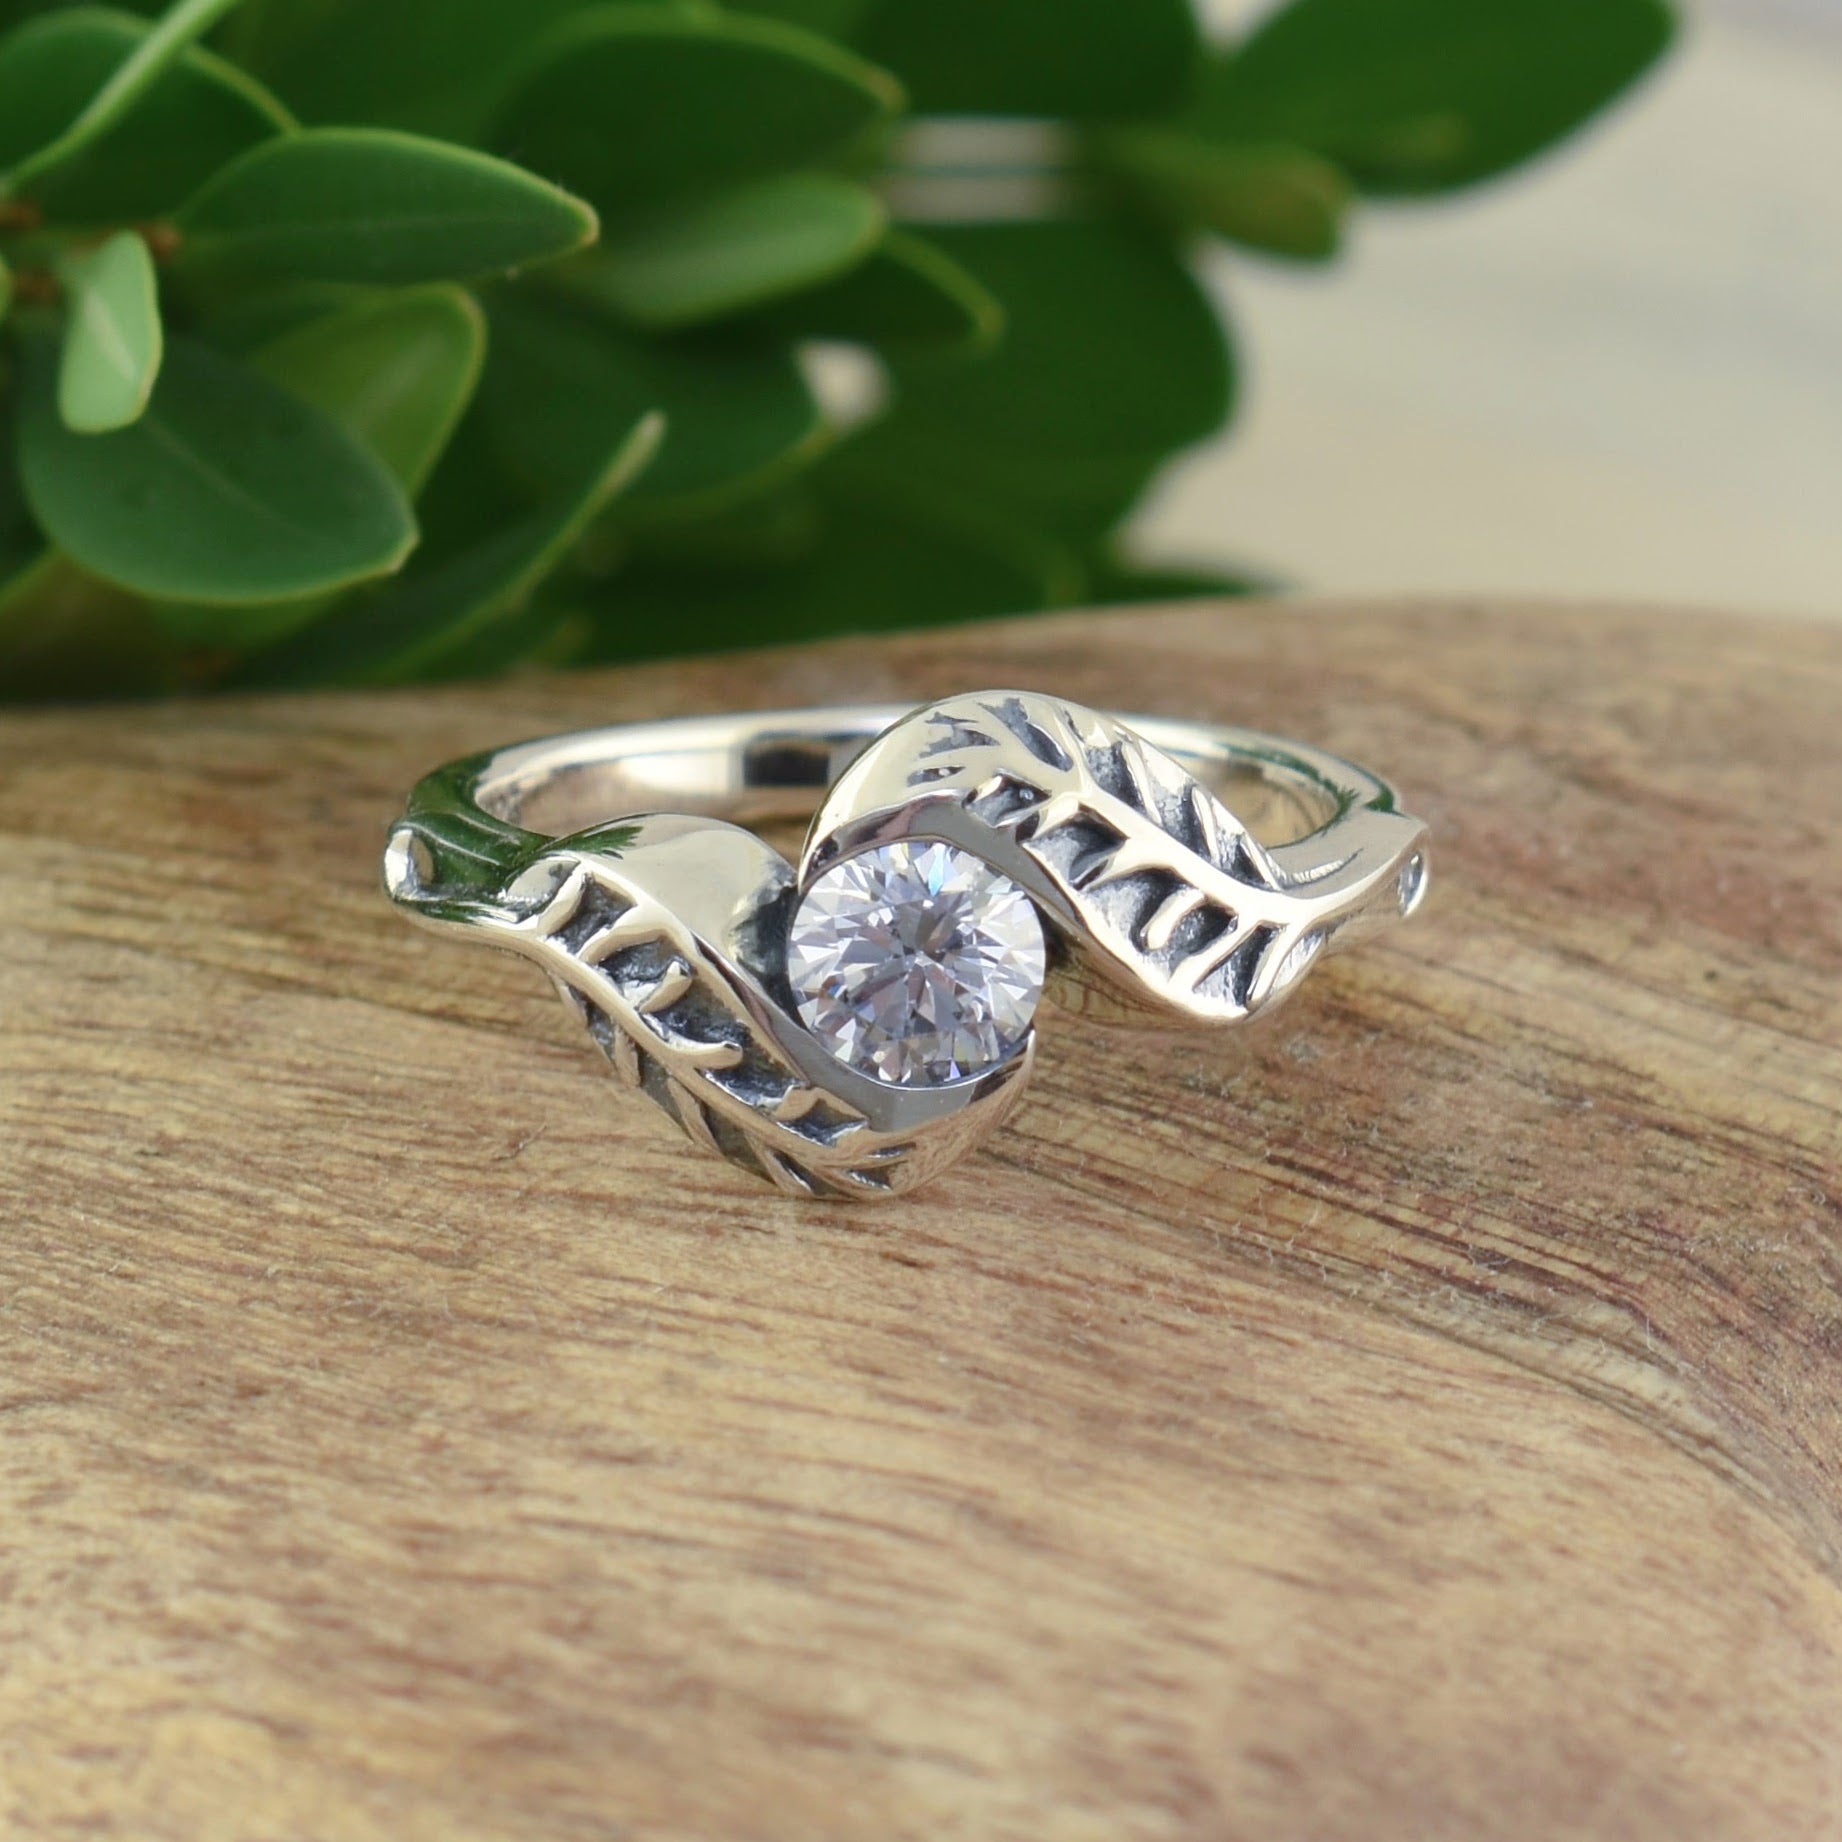 dainty antique-style ring with a round cz and leaf design